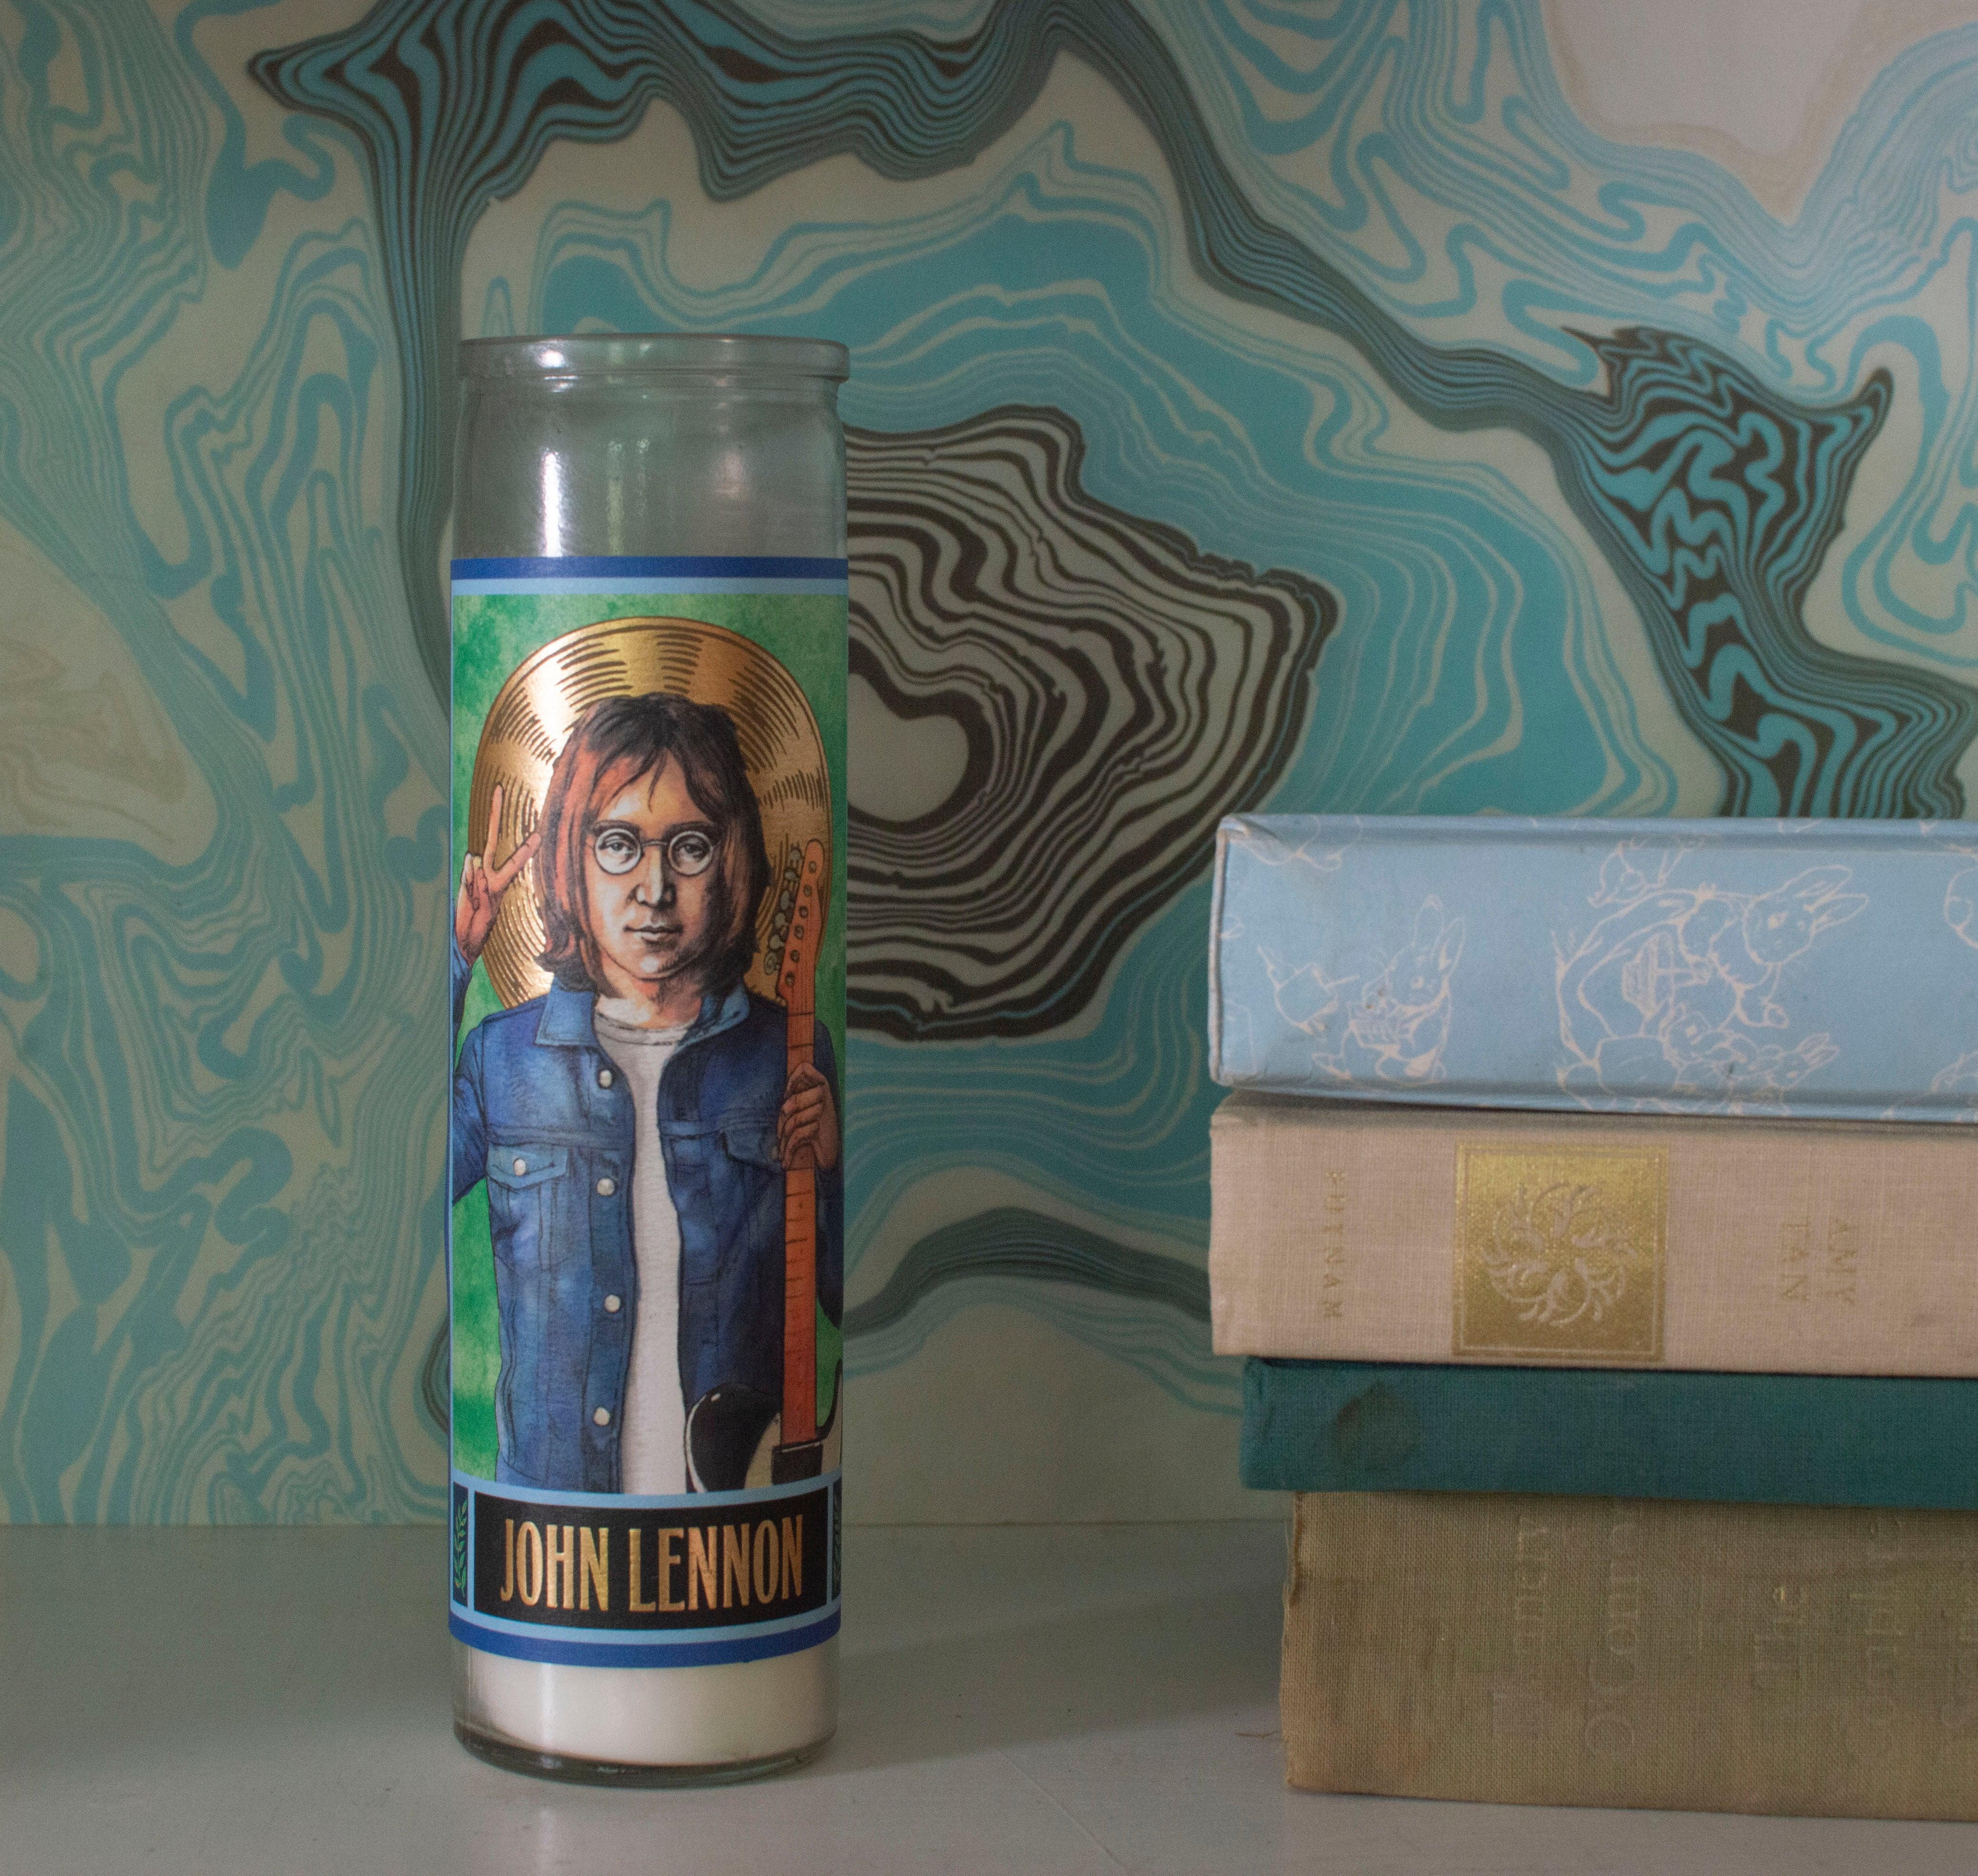 Product photo of John Lennon Secular Saint Candle, a novelty gift manufactured by The Unemployed Philosophers Guild.